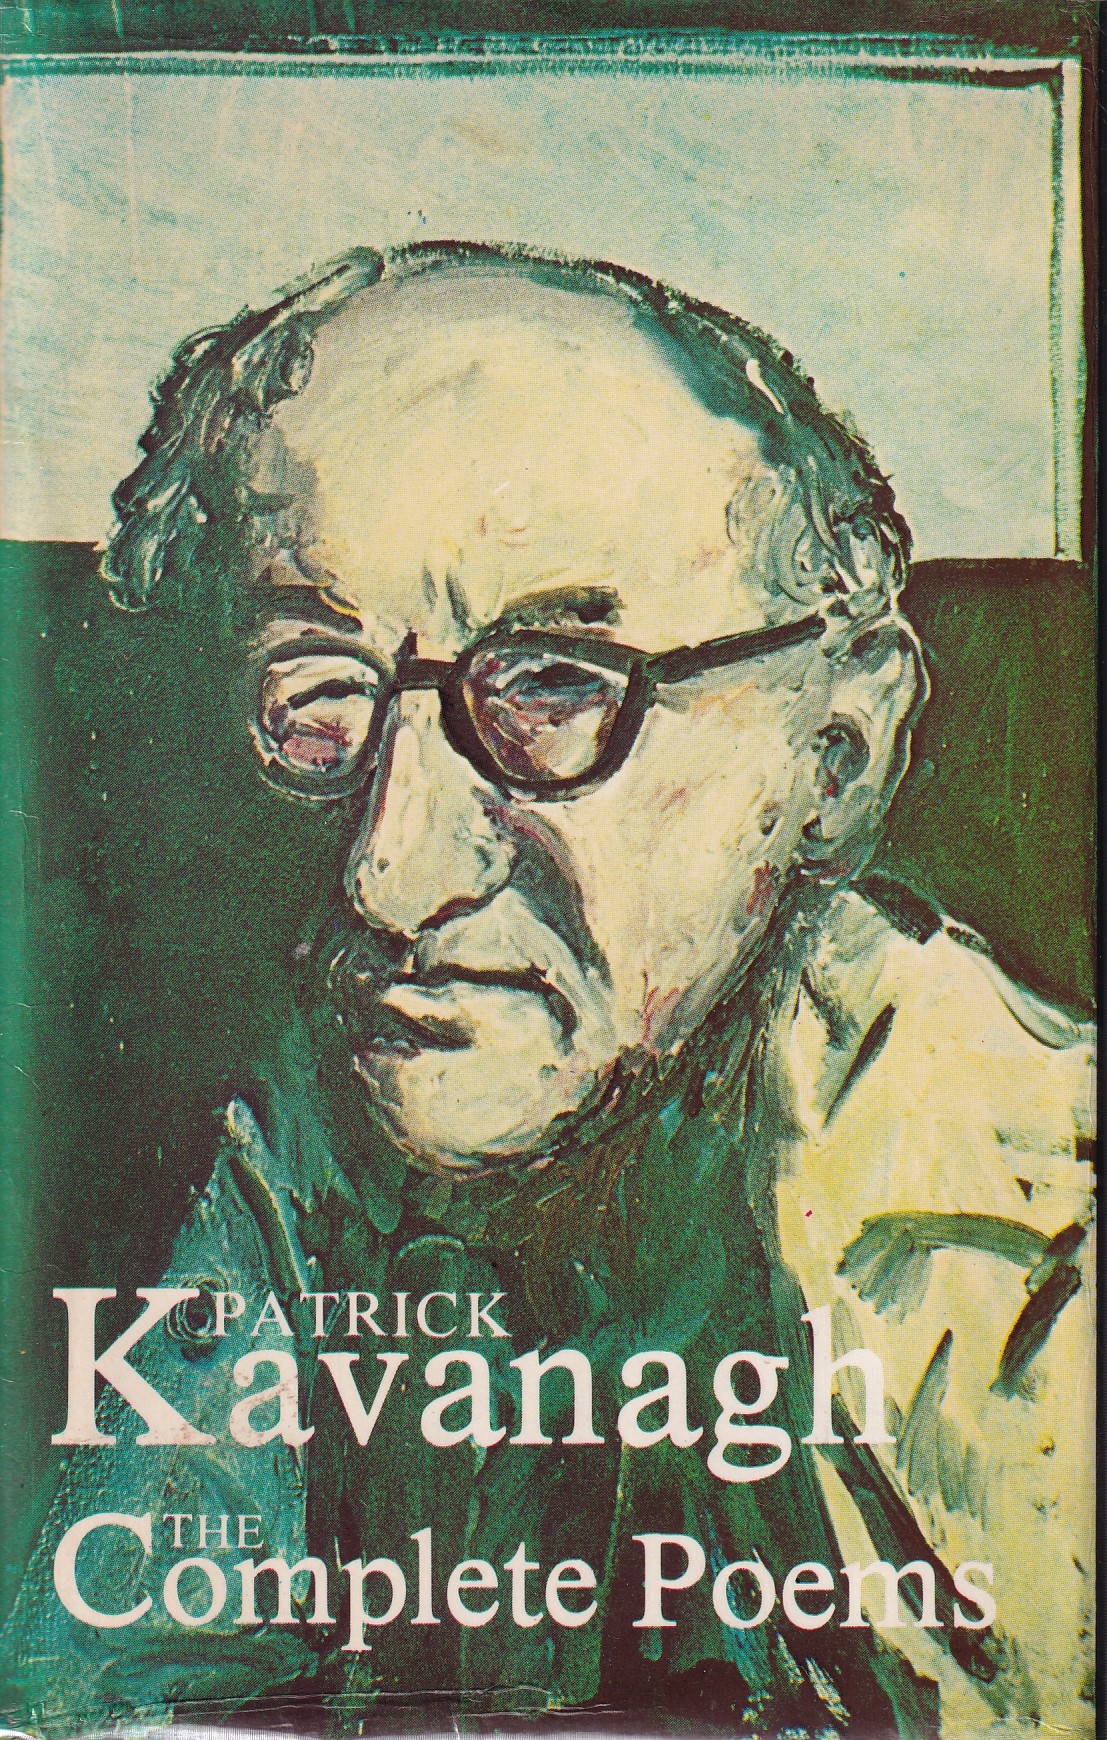 Patrick Kavanagh: The Compete Poems by Patrick Kavanagh